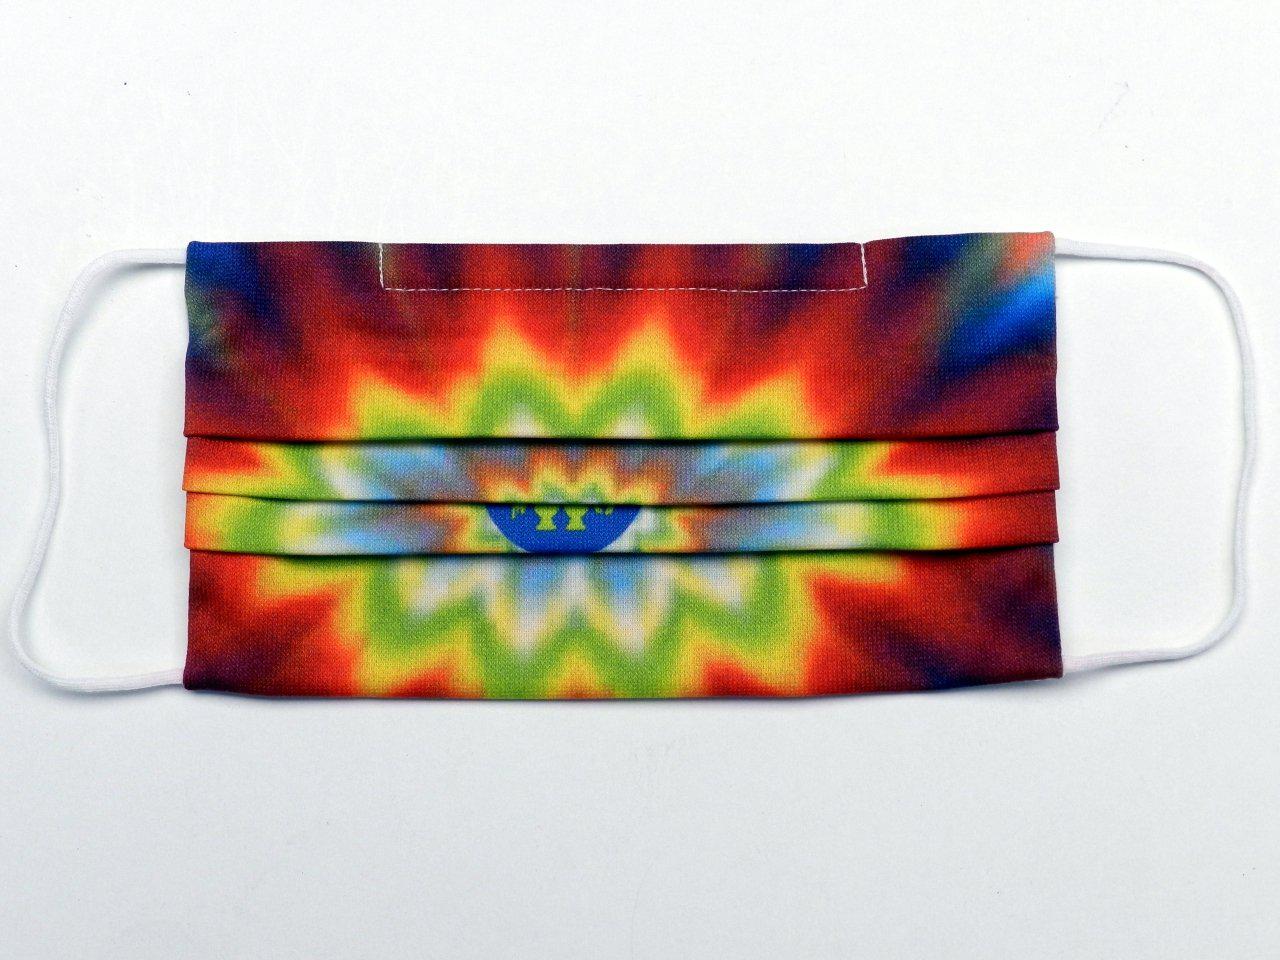 REUSABLE MASK TIE DYE FANTASY WITH 3 FILTERS INCLUDED. - Limited Edition Paul Meccanico